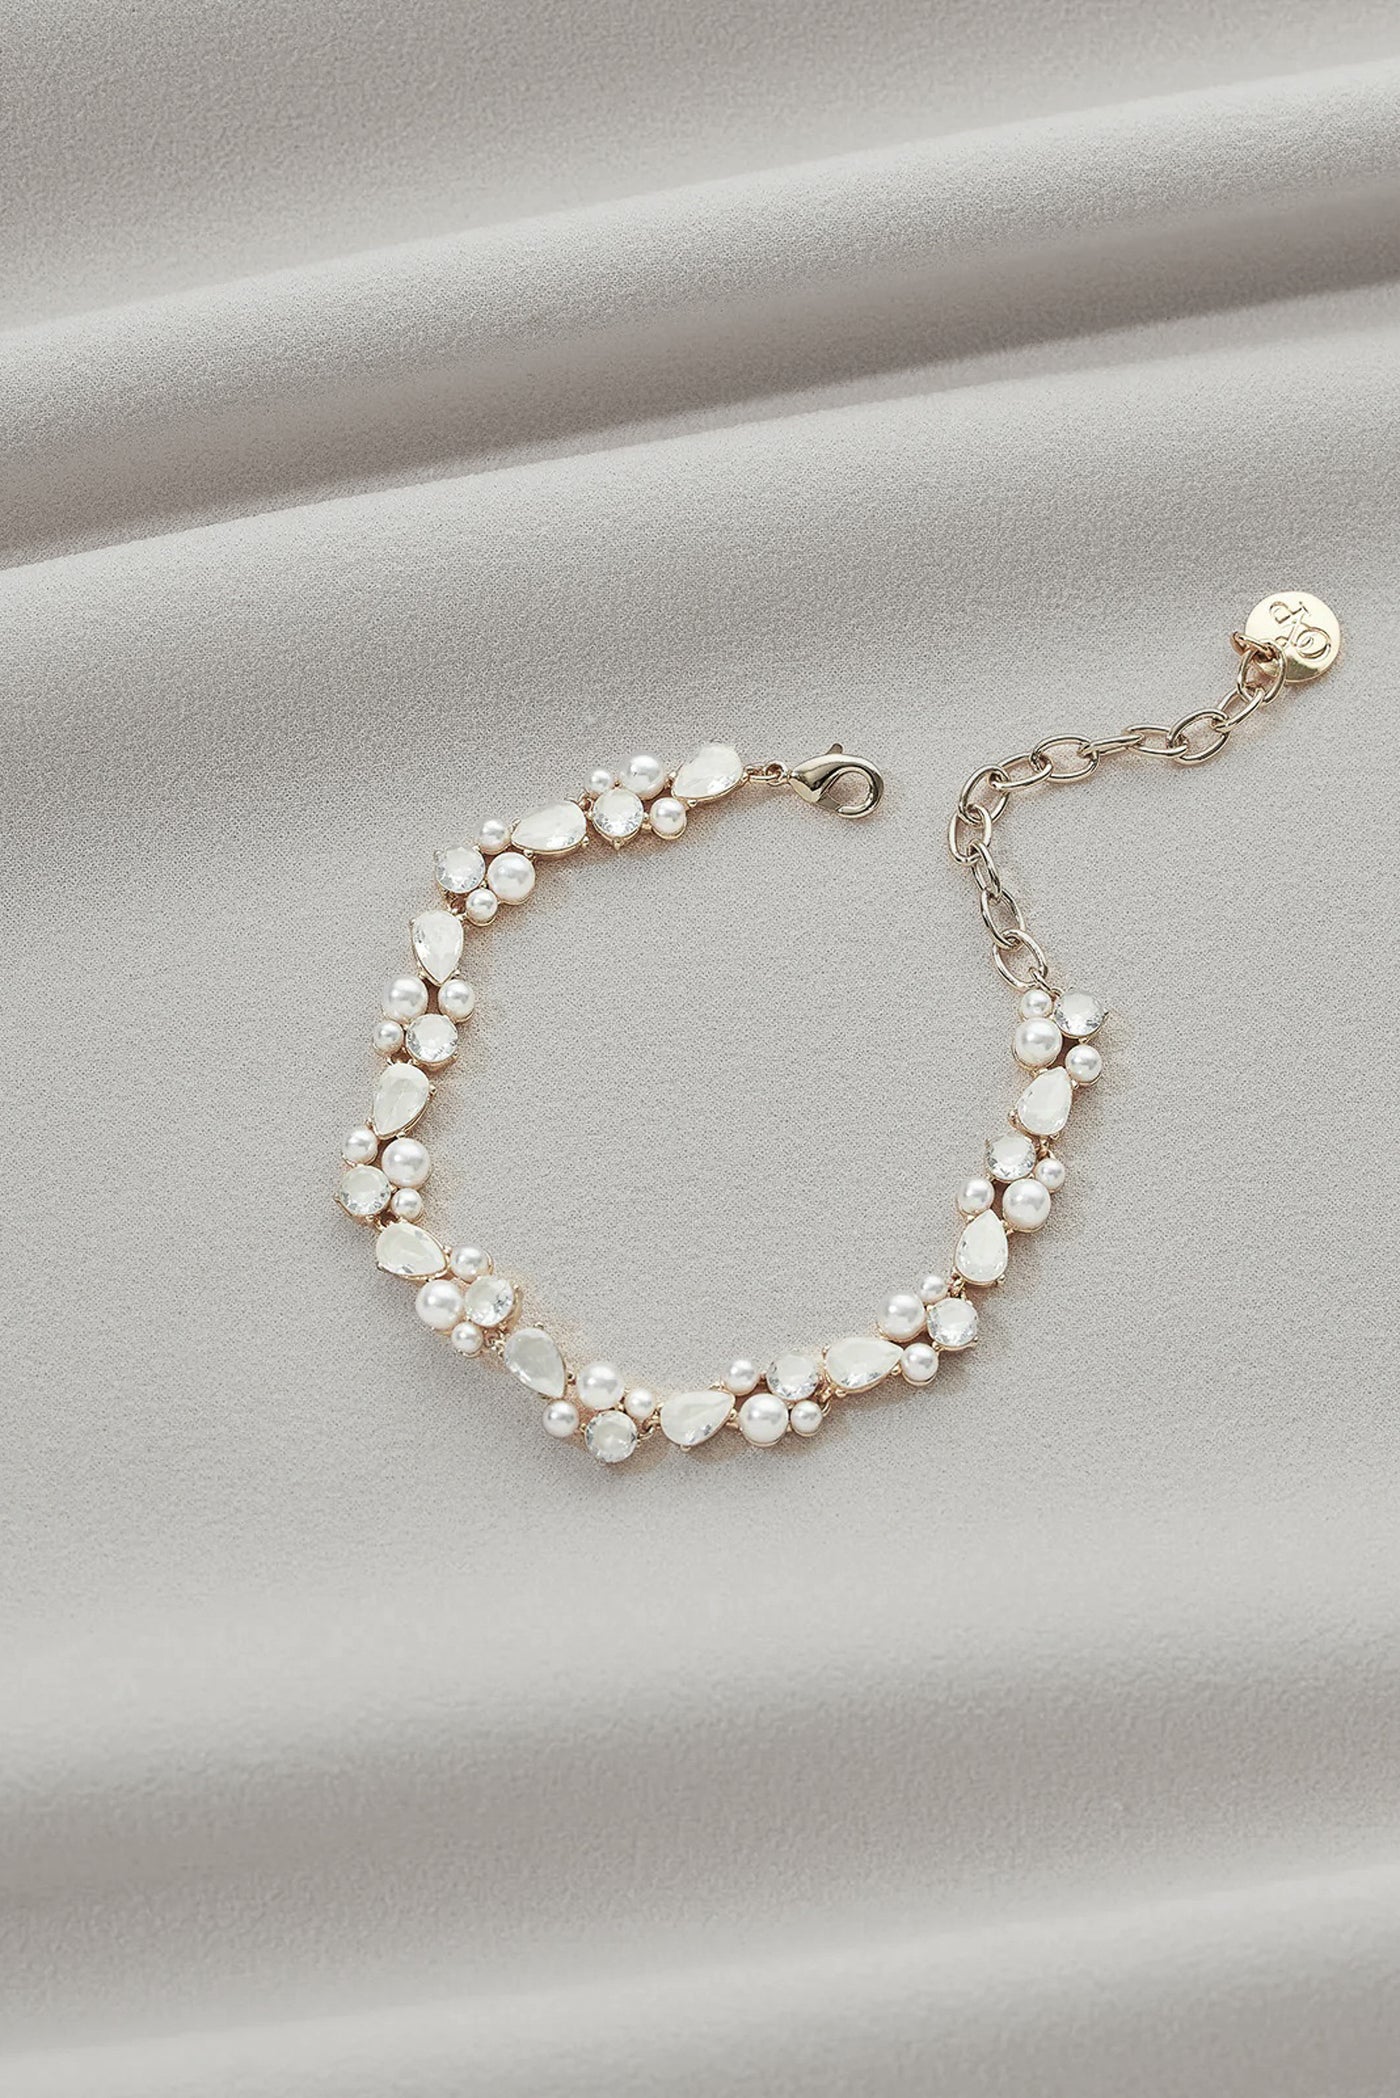 A gold bracelet with teardrop gems and little pearl details.